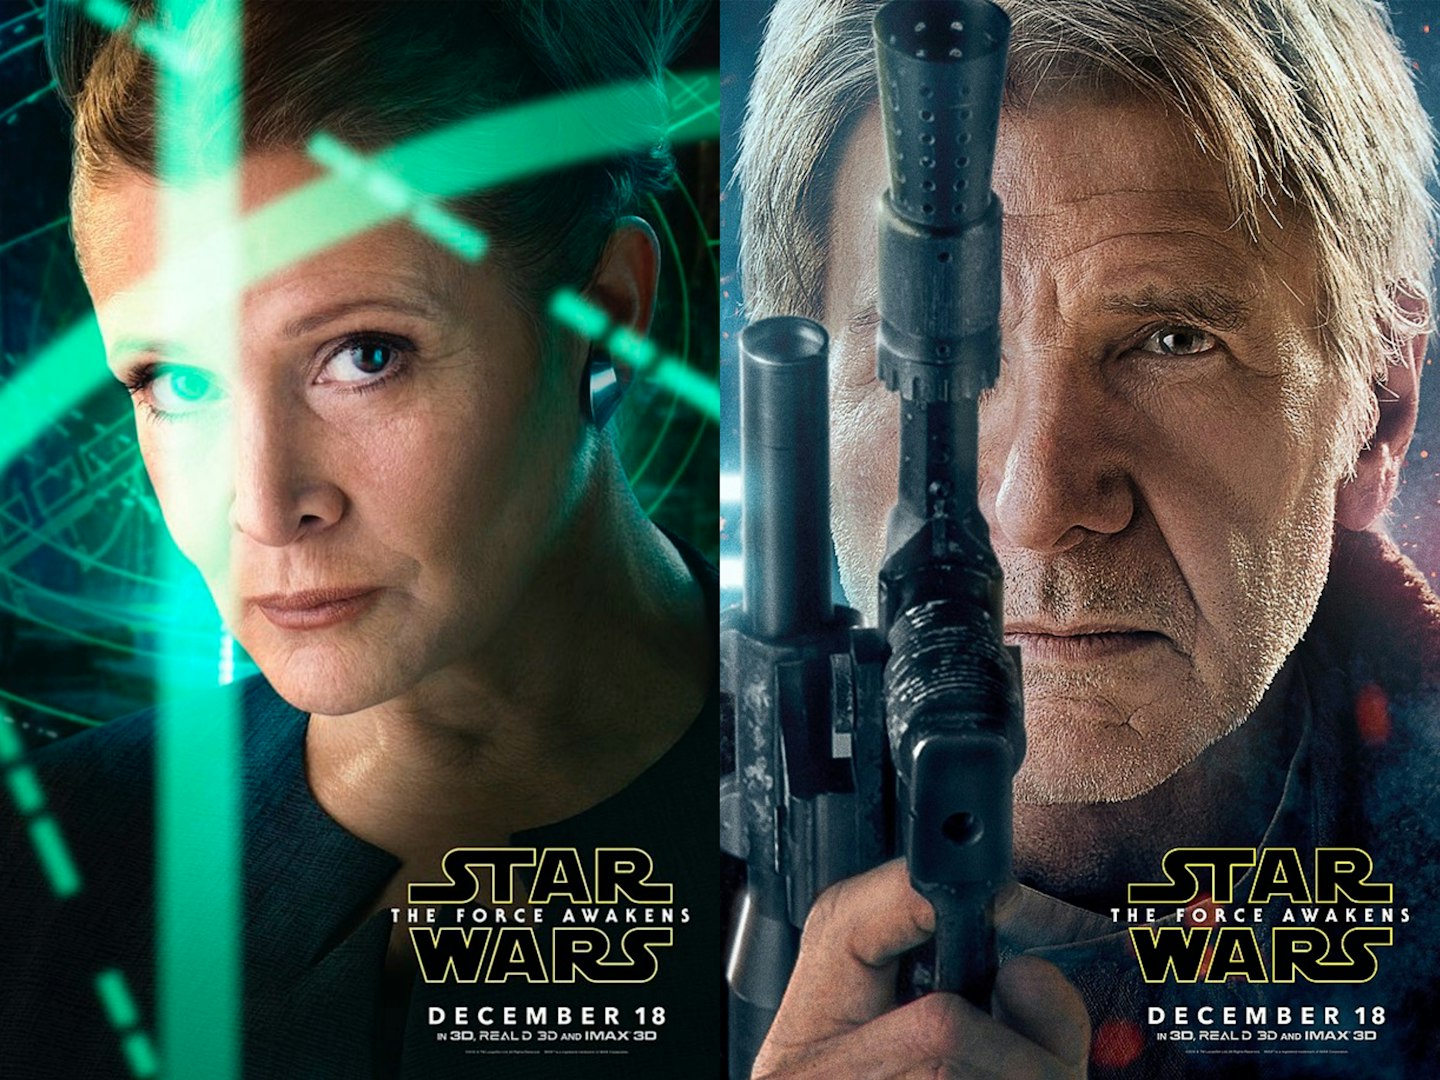 Star Wars: The Force Awakens Character Posters Arrive Movies